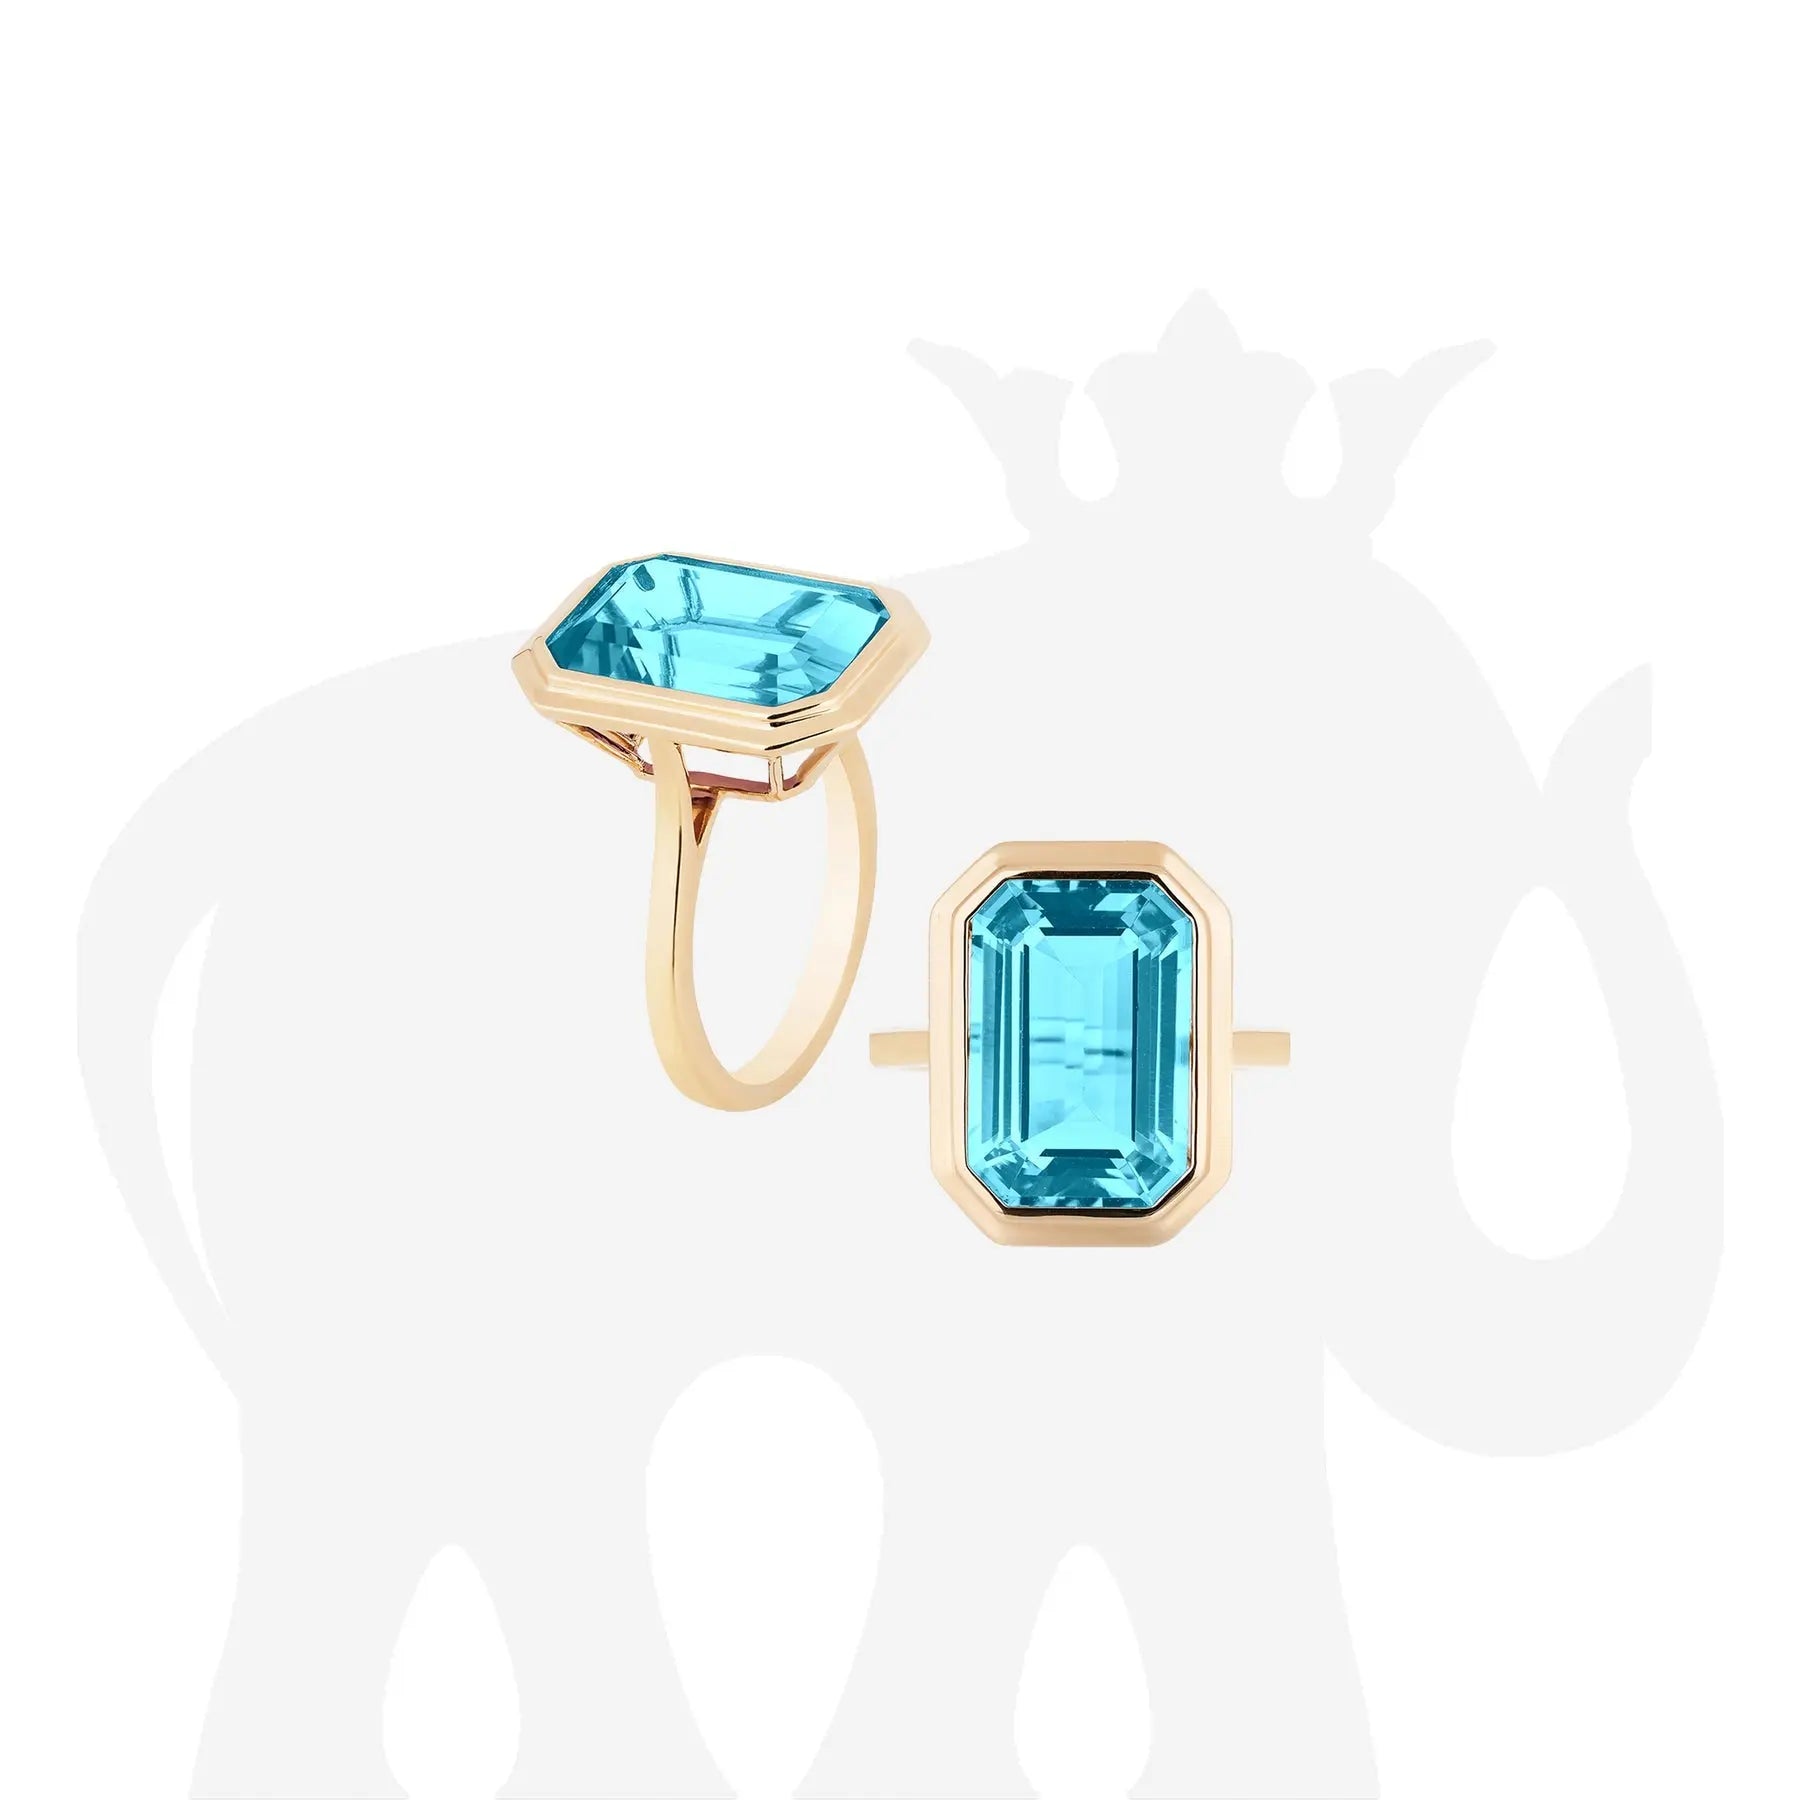 Manhattan' Blue Topaz Emerald Cut Bezel Set Plain Gold Ring in 18k yellow gold. The stone size is 10x15mm. The blue topaz is 9.38 cttw.